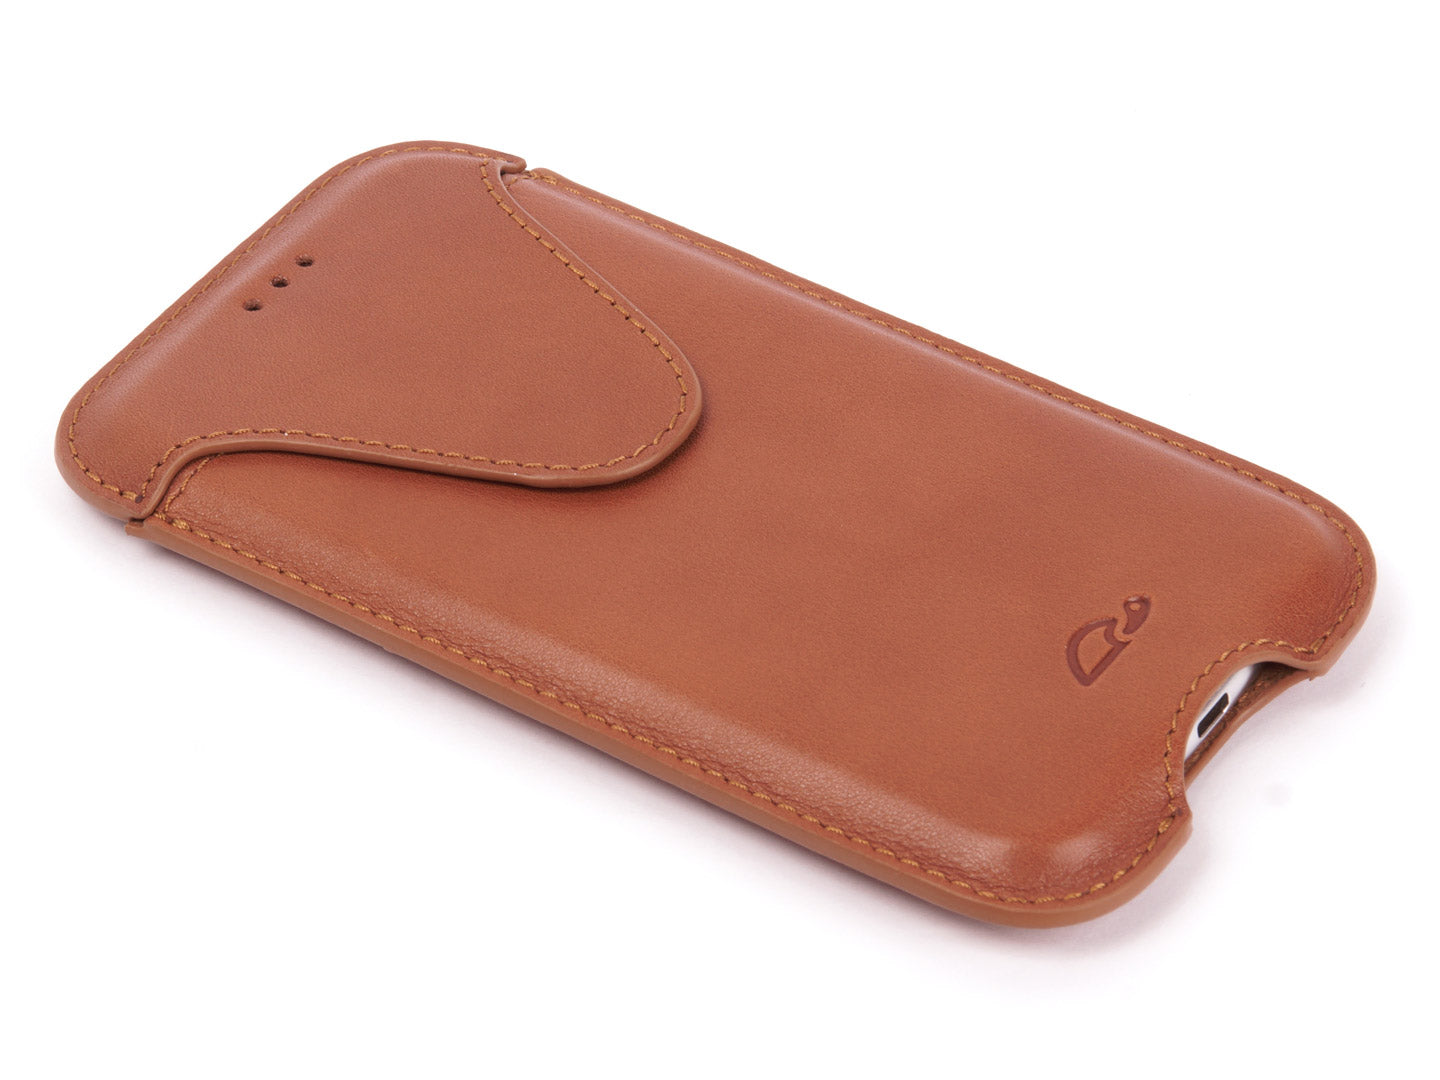 iPhone X / Xs / 11 Pro sleeve case - protecive leather pouch - tan - front - Carapaz